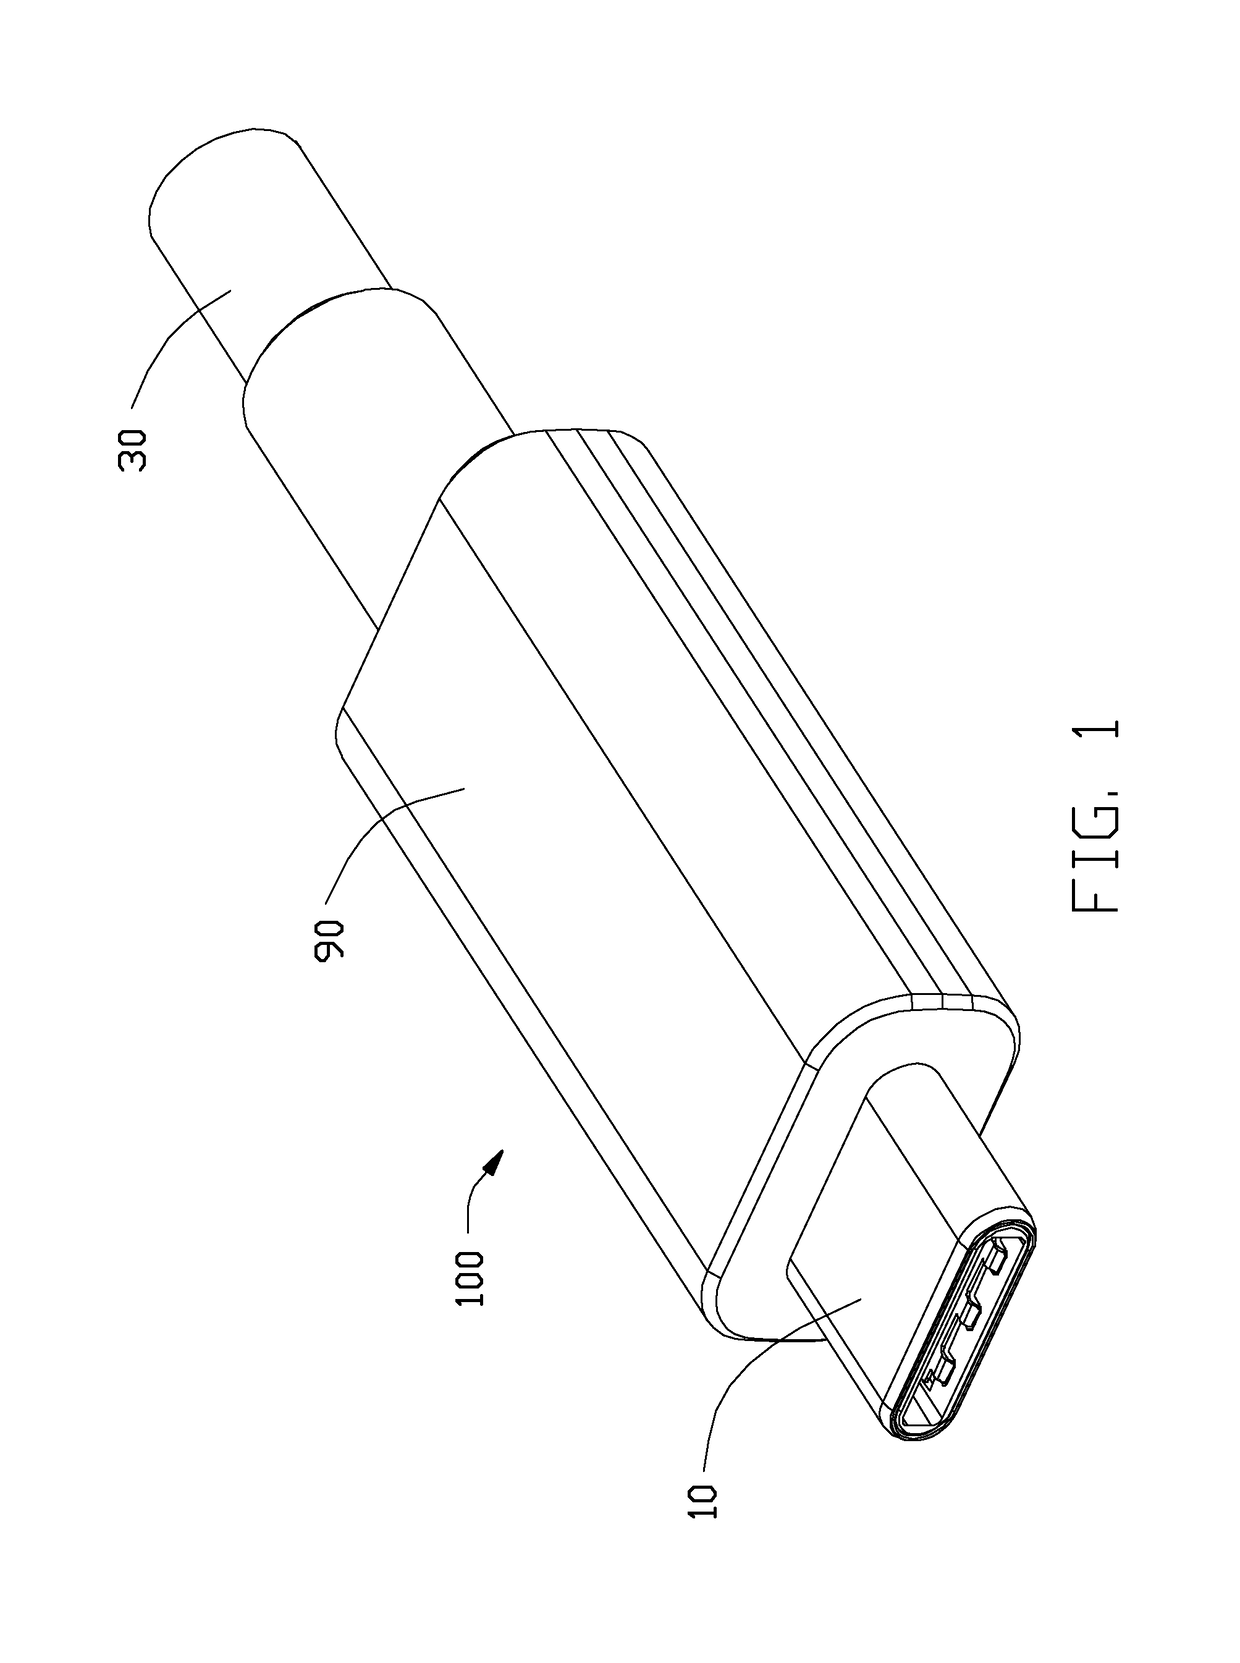 Manufacturing method of a cable connector assembly